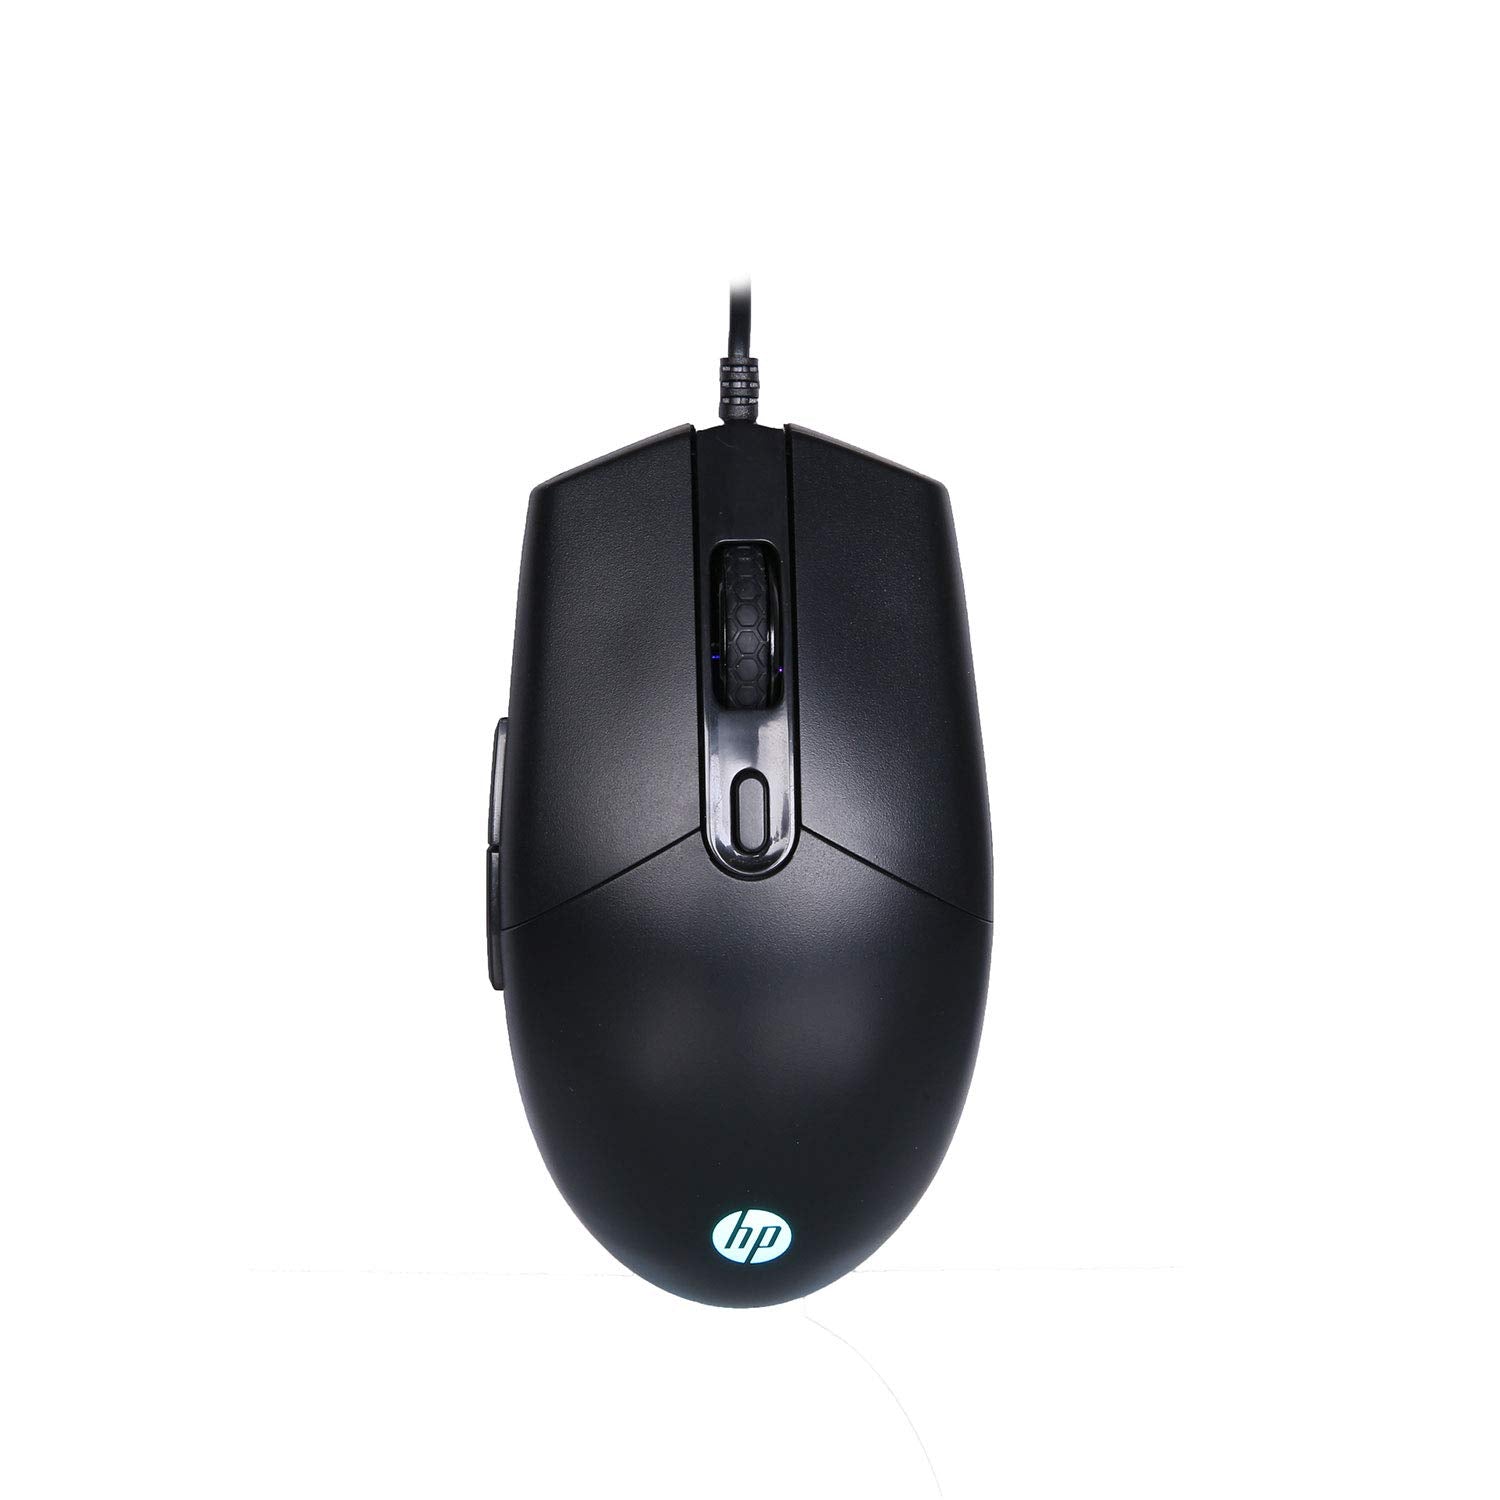 HP M260 Gaming Mouse with RGB backlighting, 6 Programmable Buttons, Customizable 6400 DPI, Ergonomic Design, Non-Slip Roller, Lightweight USB Wired Mouse...